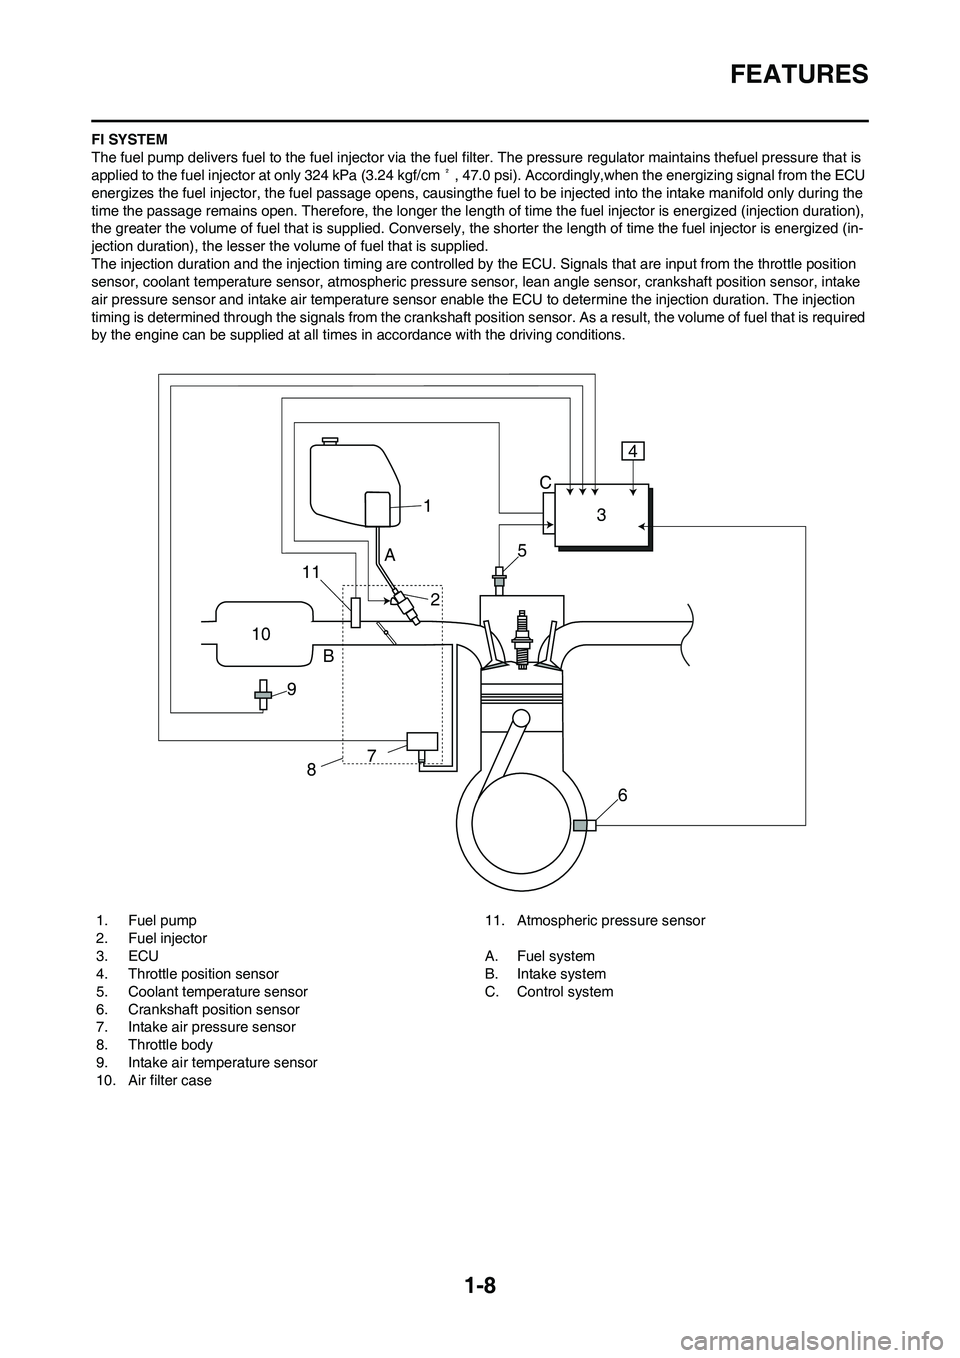 YAMAHA YZ450F 2011  Owners Manual 1-8
FEATURES
FI SYSTEM
The fuel pump delivers fuel to the fuel injector via the fuel filter. The pressure regulator maintains thefuel pressure that is 
applied to the fuel injector at only 324 kPa (3.